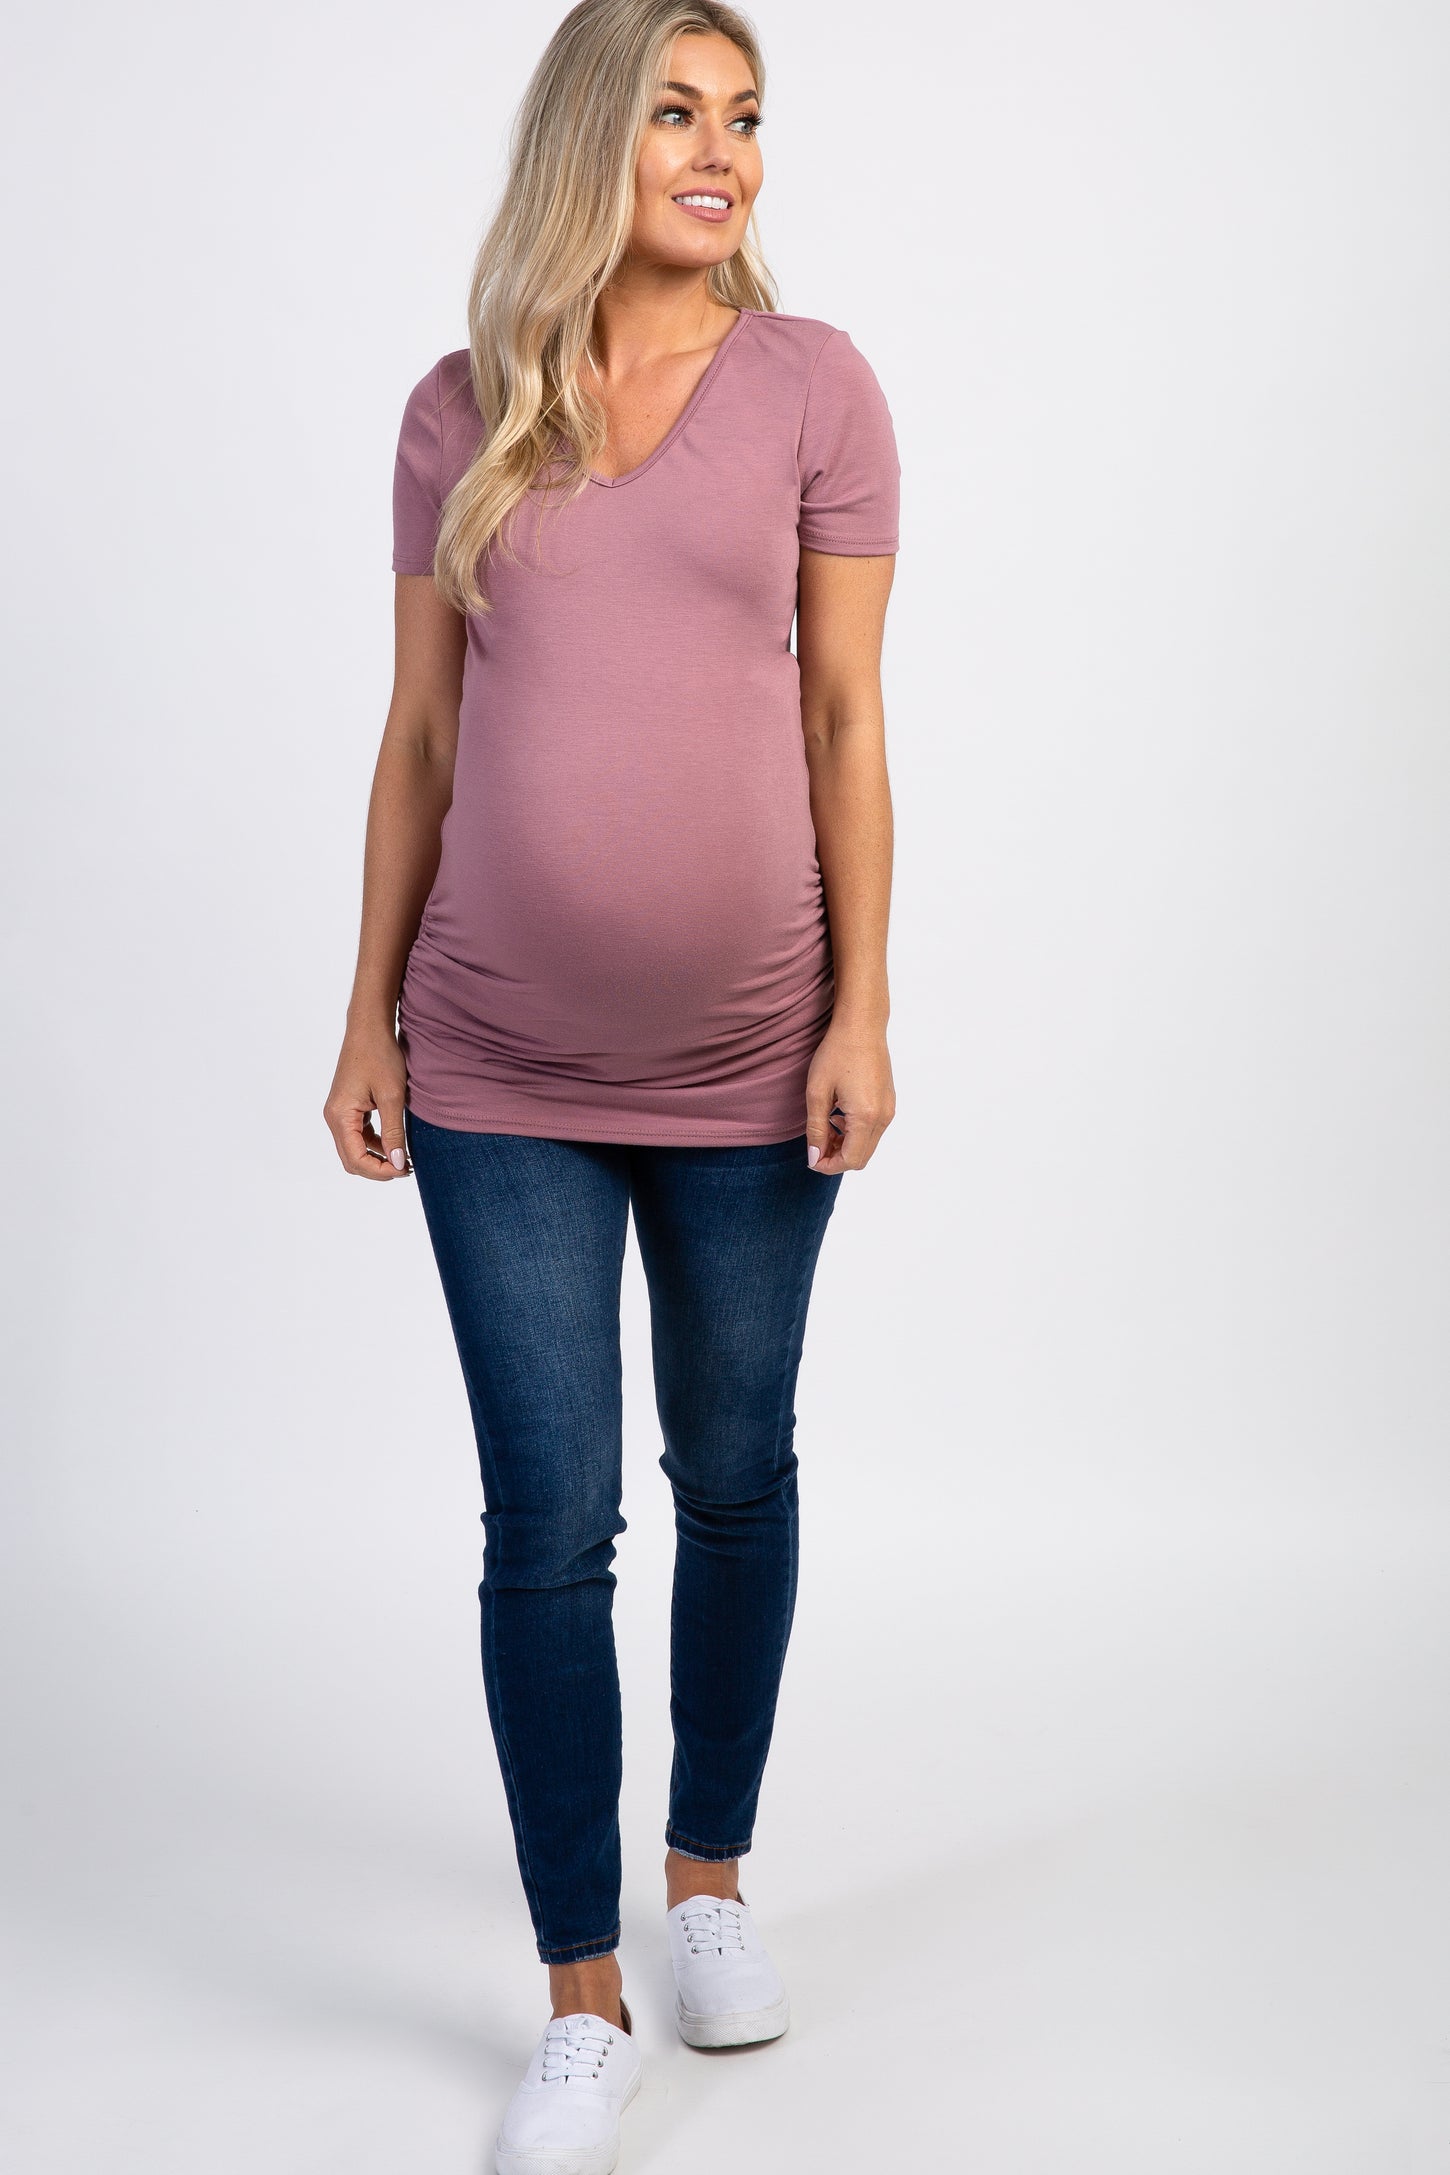 PinkBlush Mauve Ruched Short Sleeve Maternity Top